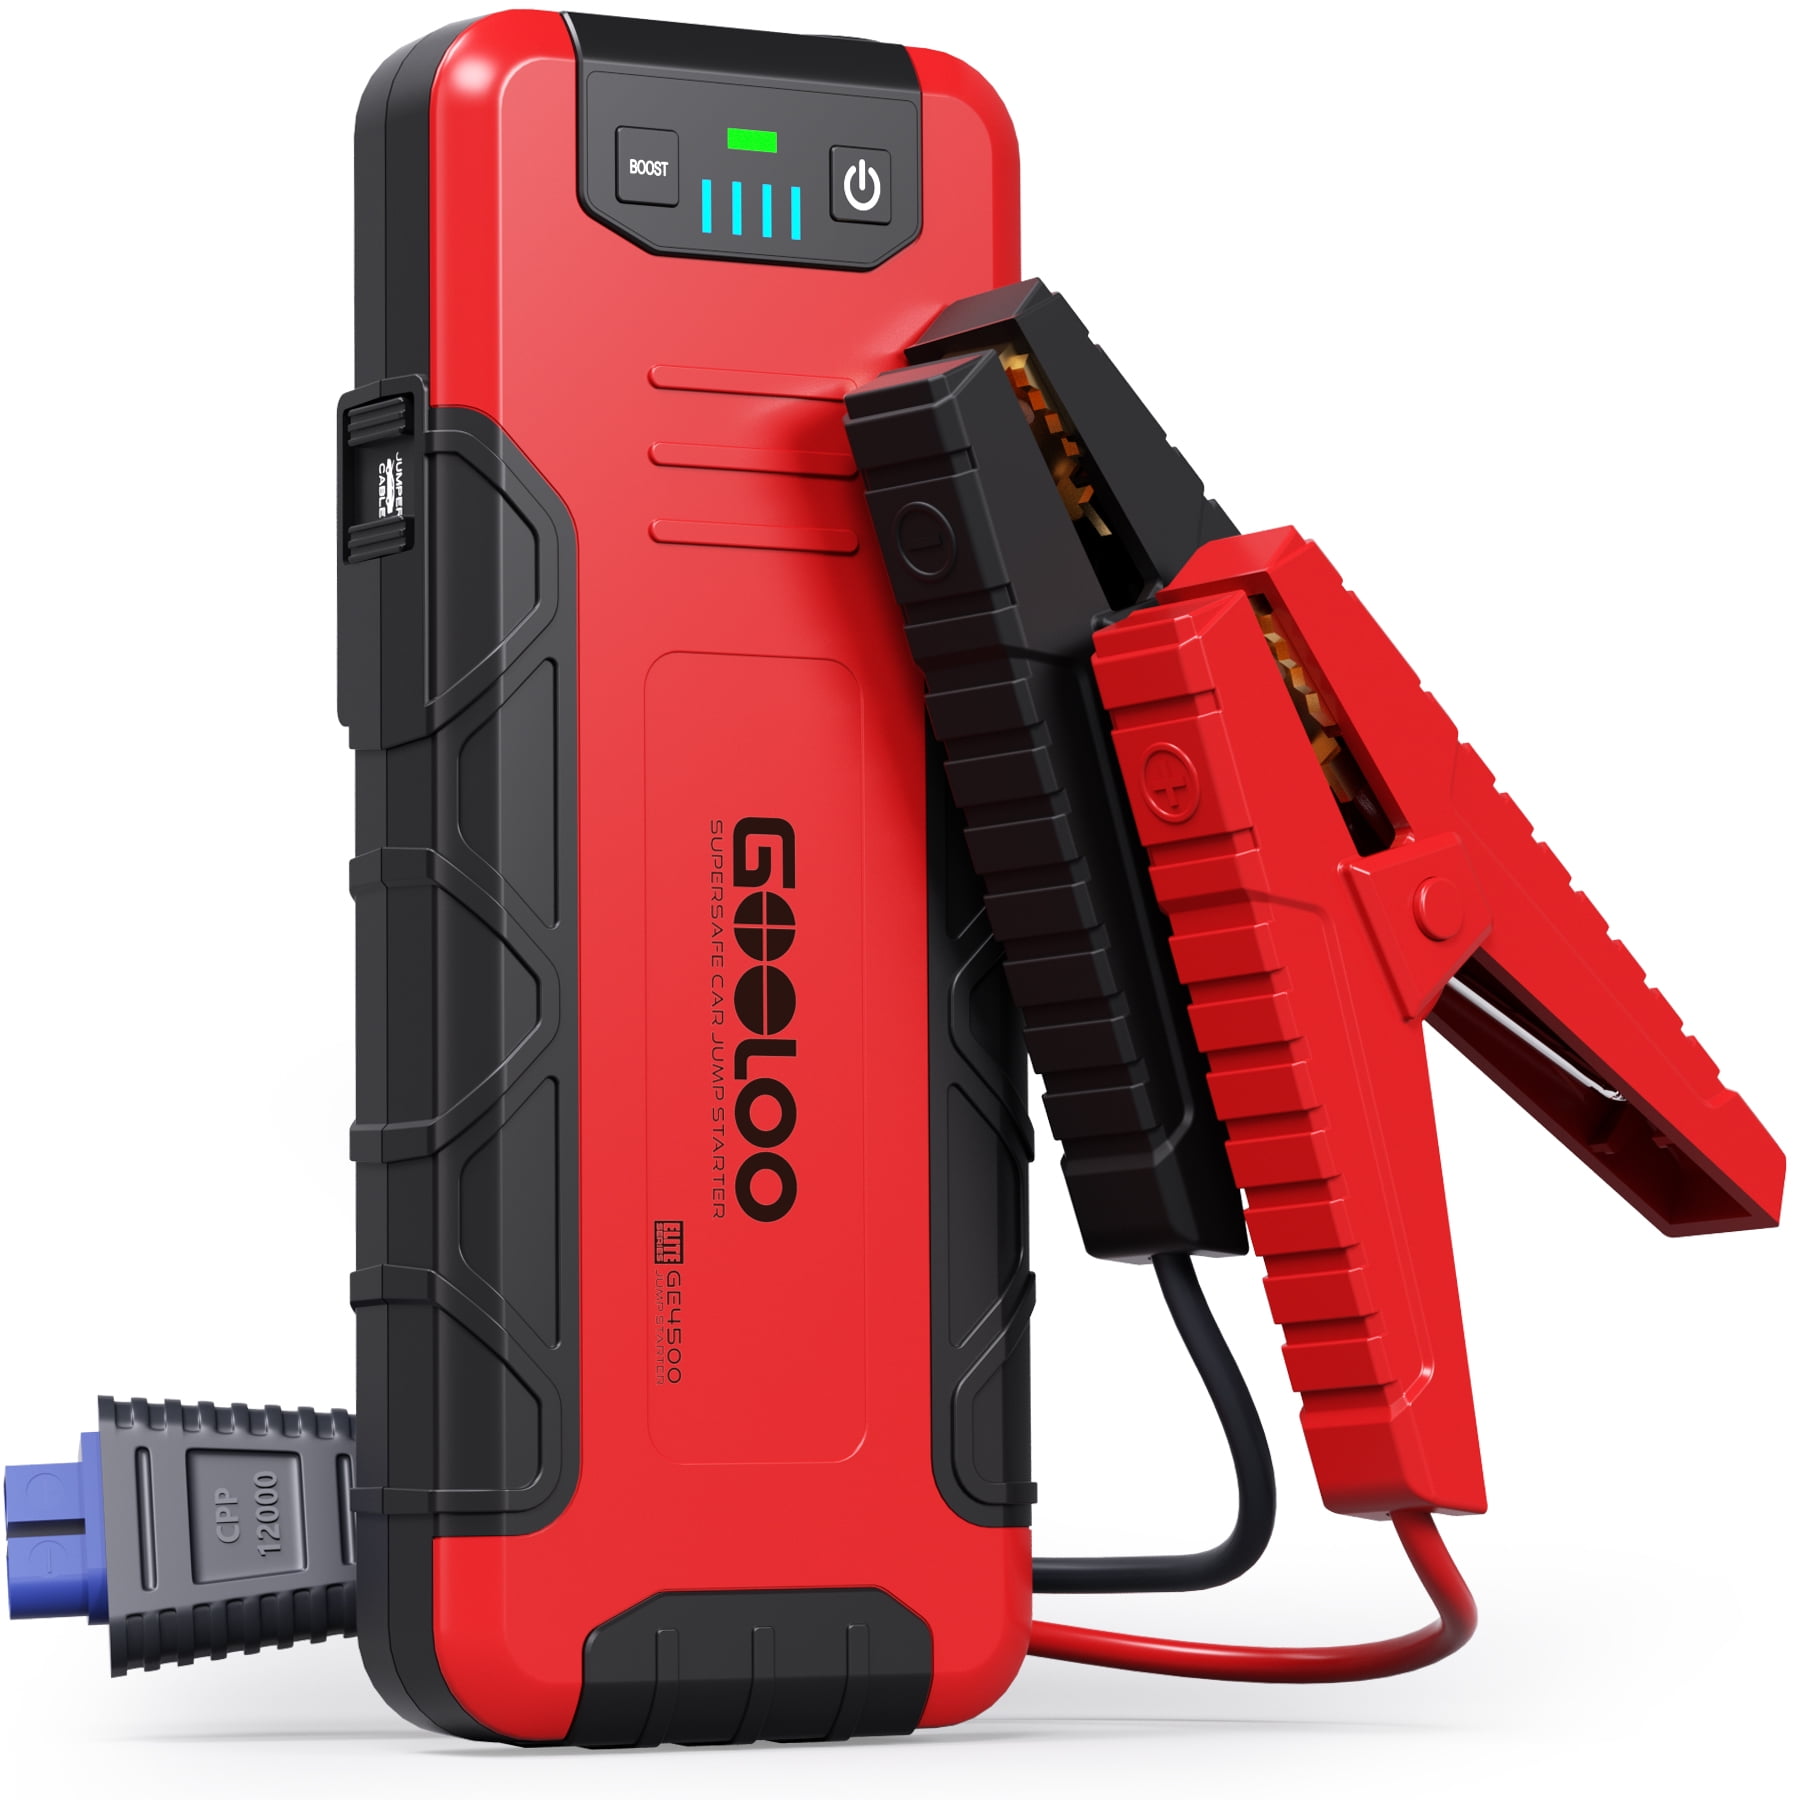 GOOLOO Car Battery Jump Starter,4500A Peak Jump Starter with USB Quick Charge (for 10L Gas or Up to 8L Diesel),GE4500 12V Jumper Pack with LED Light Powerful $63.99